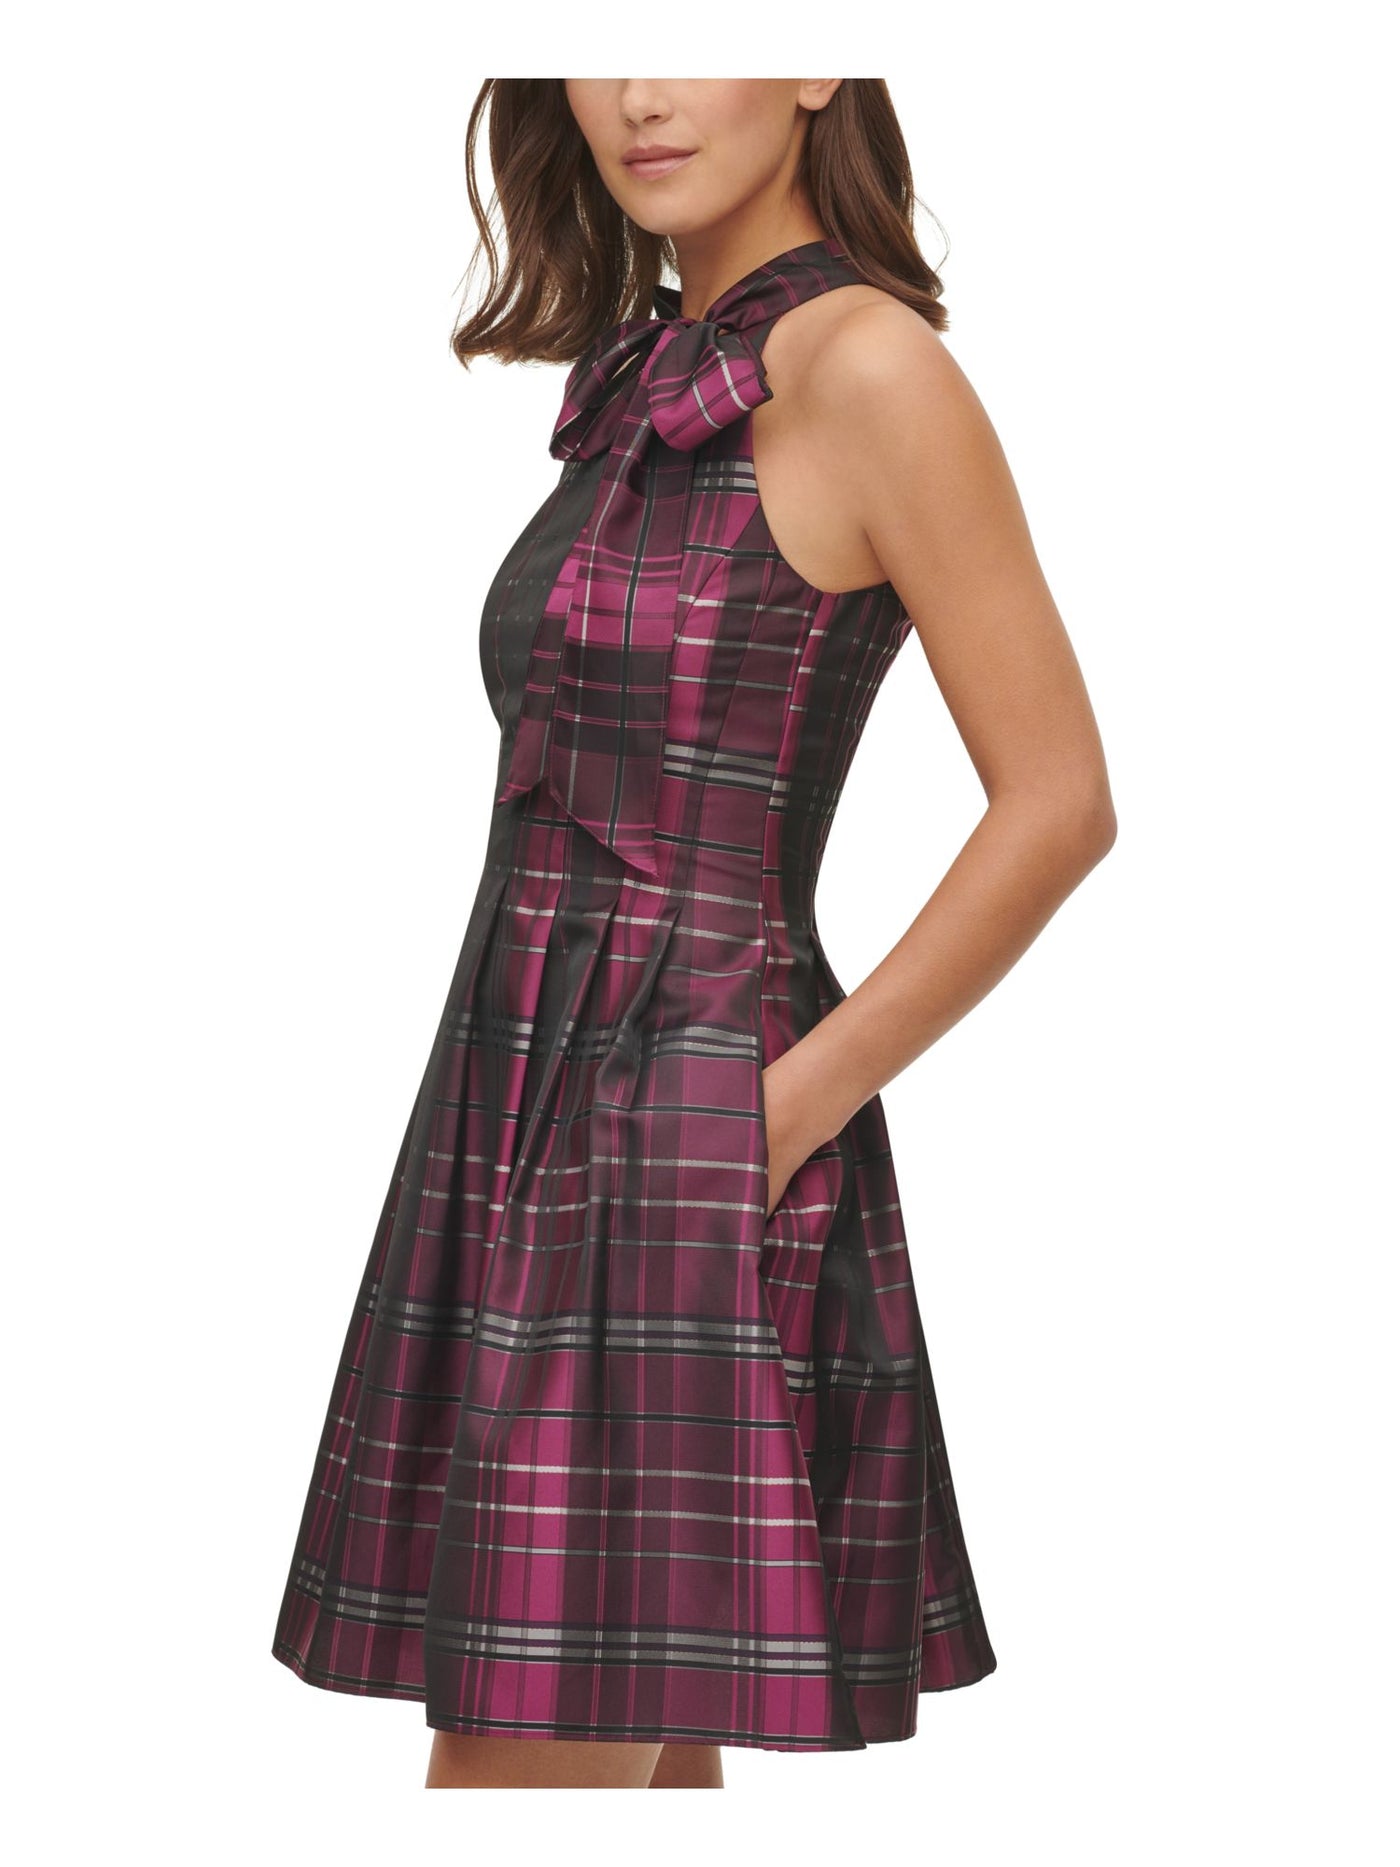 VINCE CAMUTO Womens Purple Tie Pleated Lined Plaid Sleeveless Halter Short Party Fit + Flare Dress 10